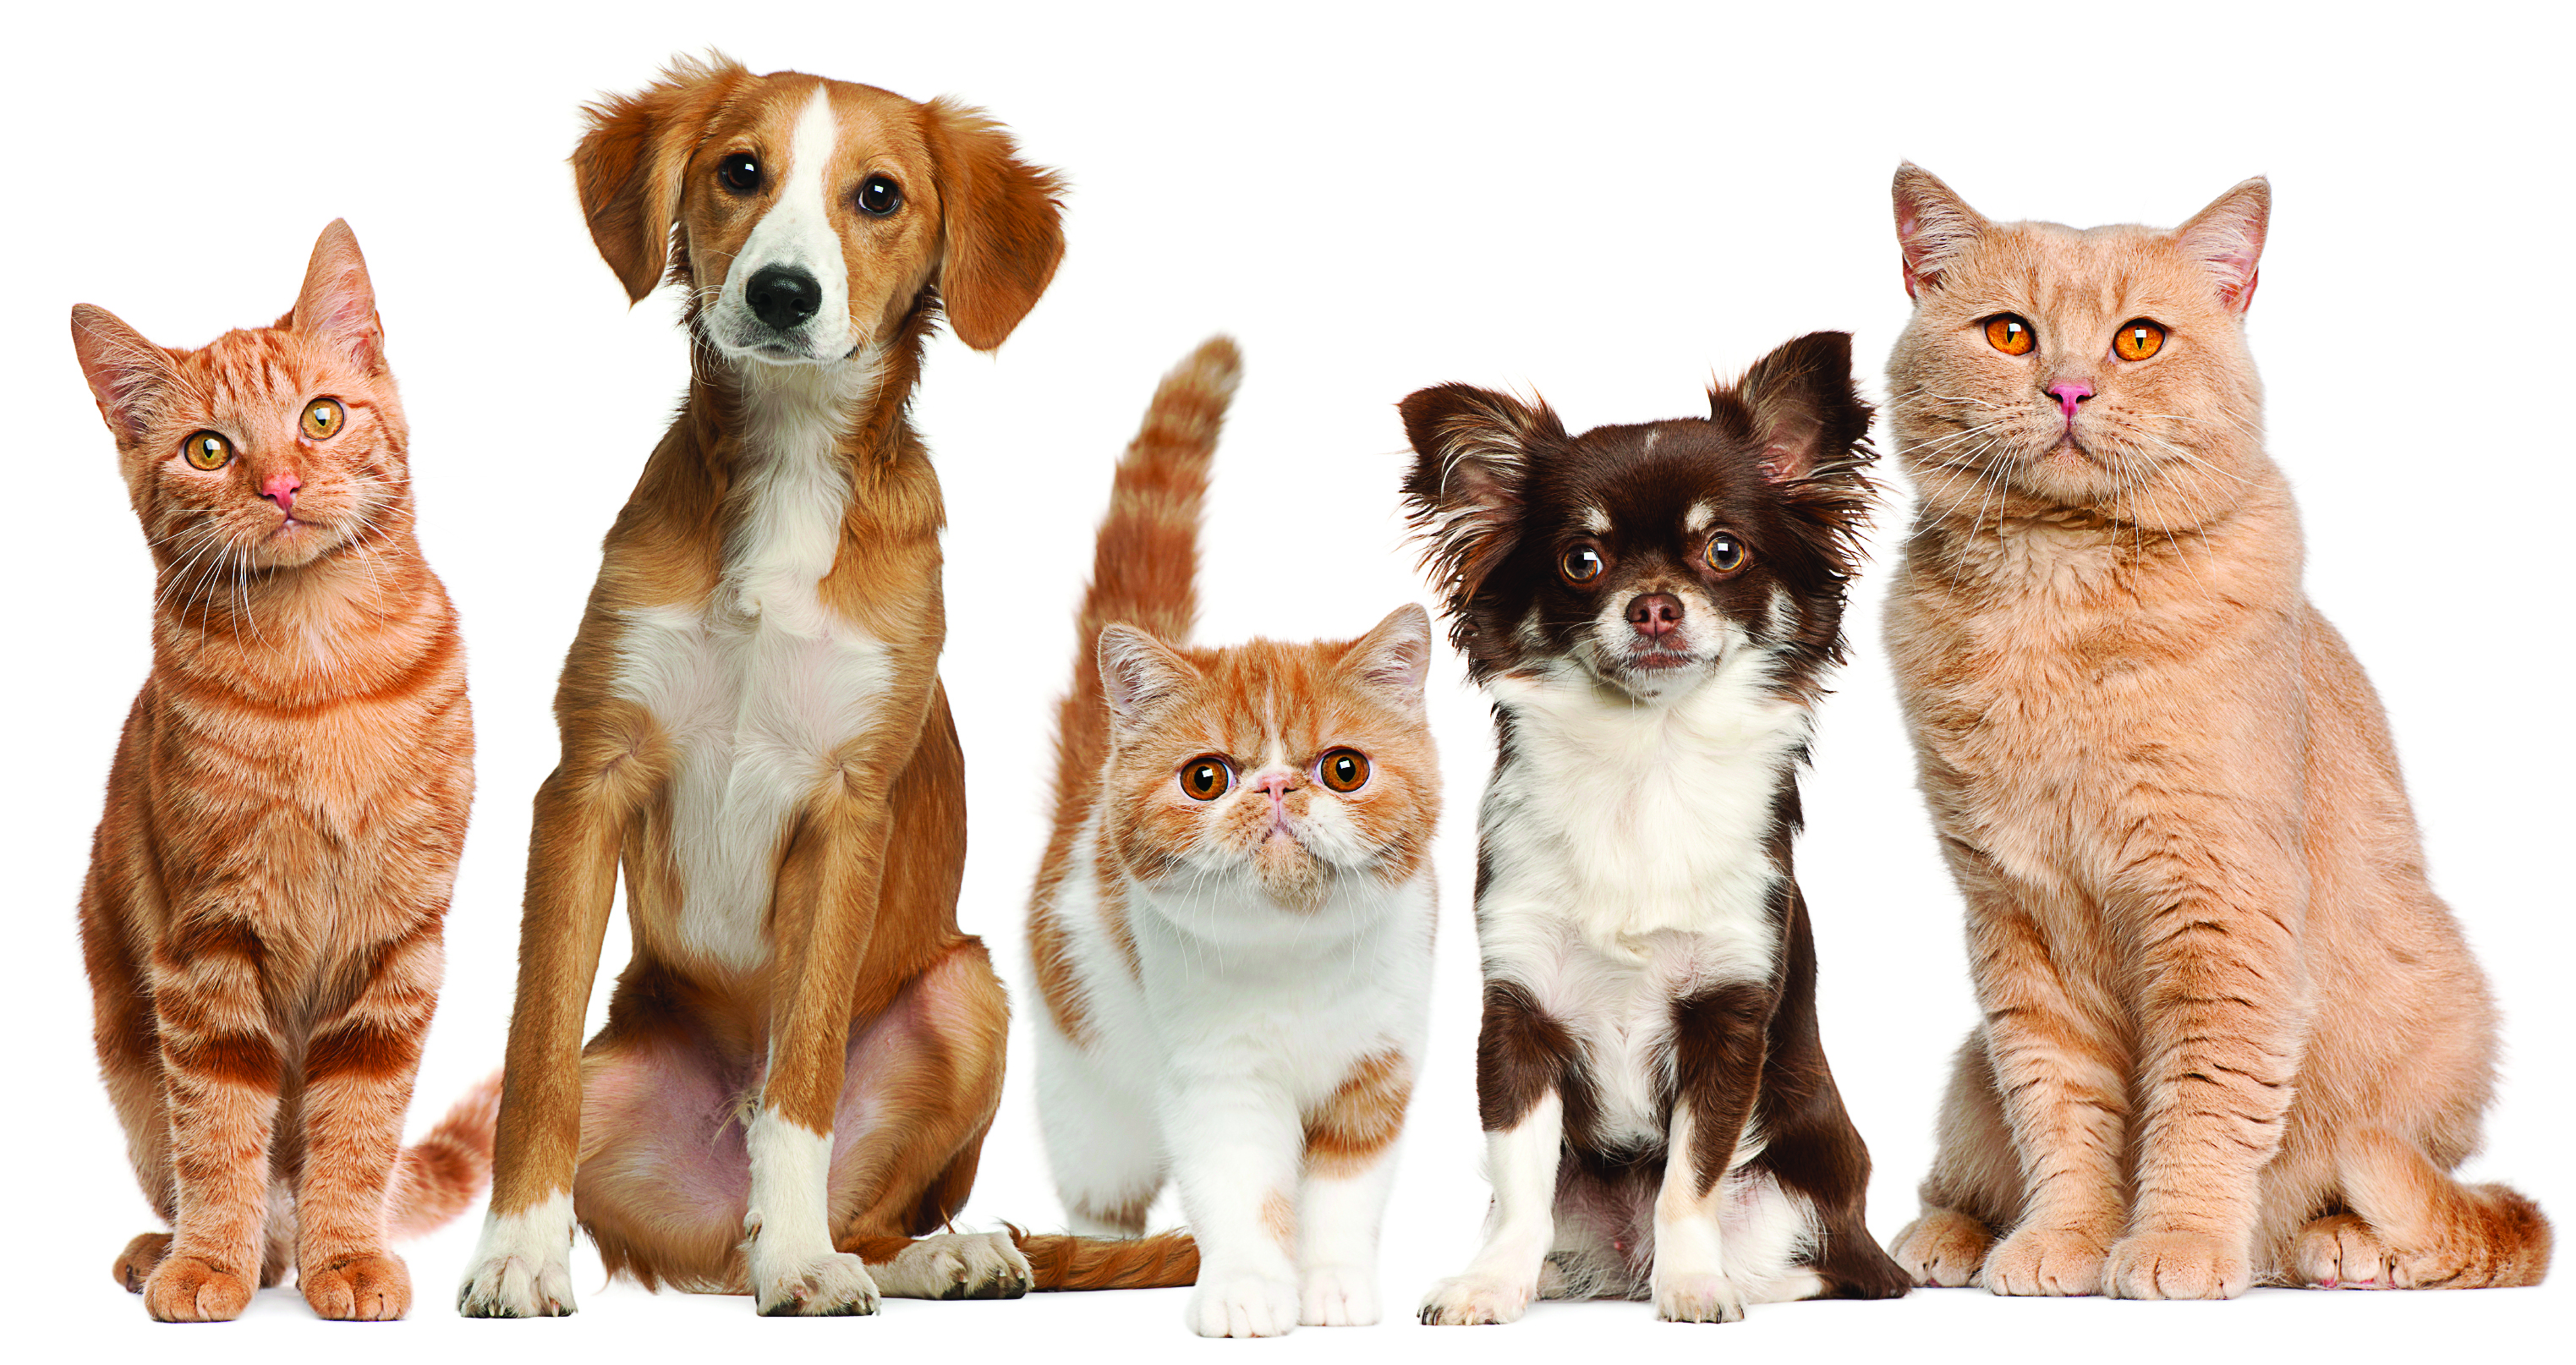 Wallpapers cats 2 dogs animals on the desktop